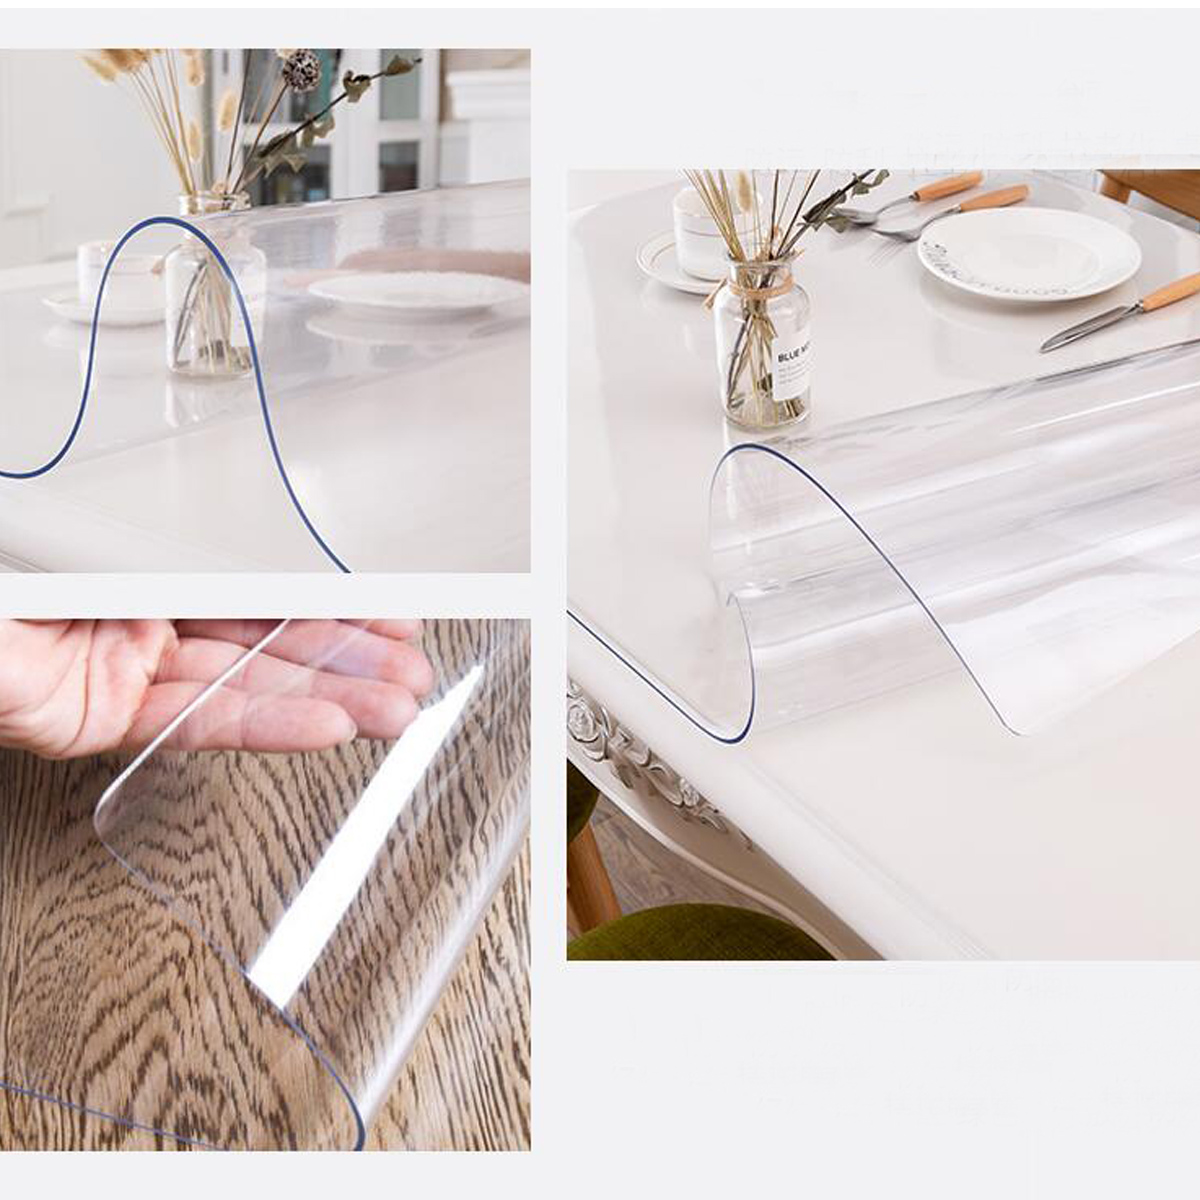 15mm-Thickness-Clear-Plastic-PVC-Tablecloth-Transparent-Non-Stick-Waterproof-Protector-Dining-Table--1882391-5